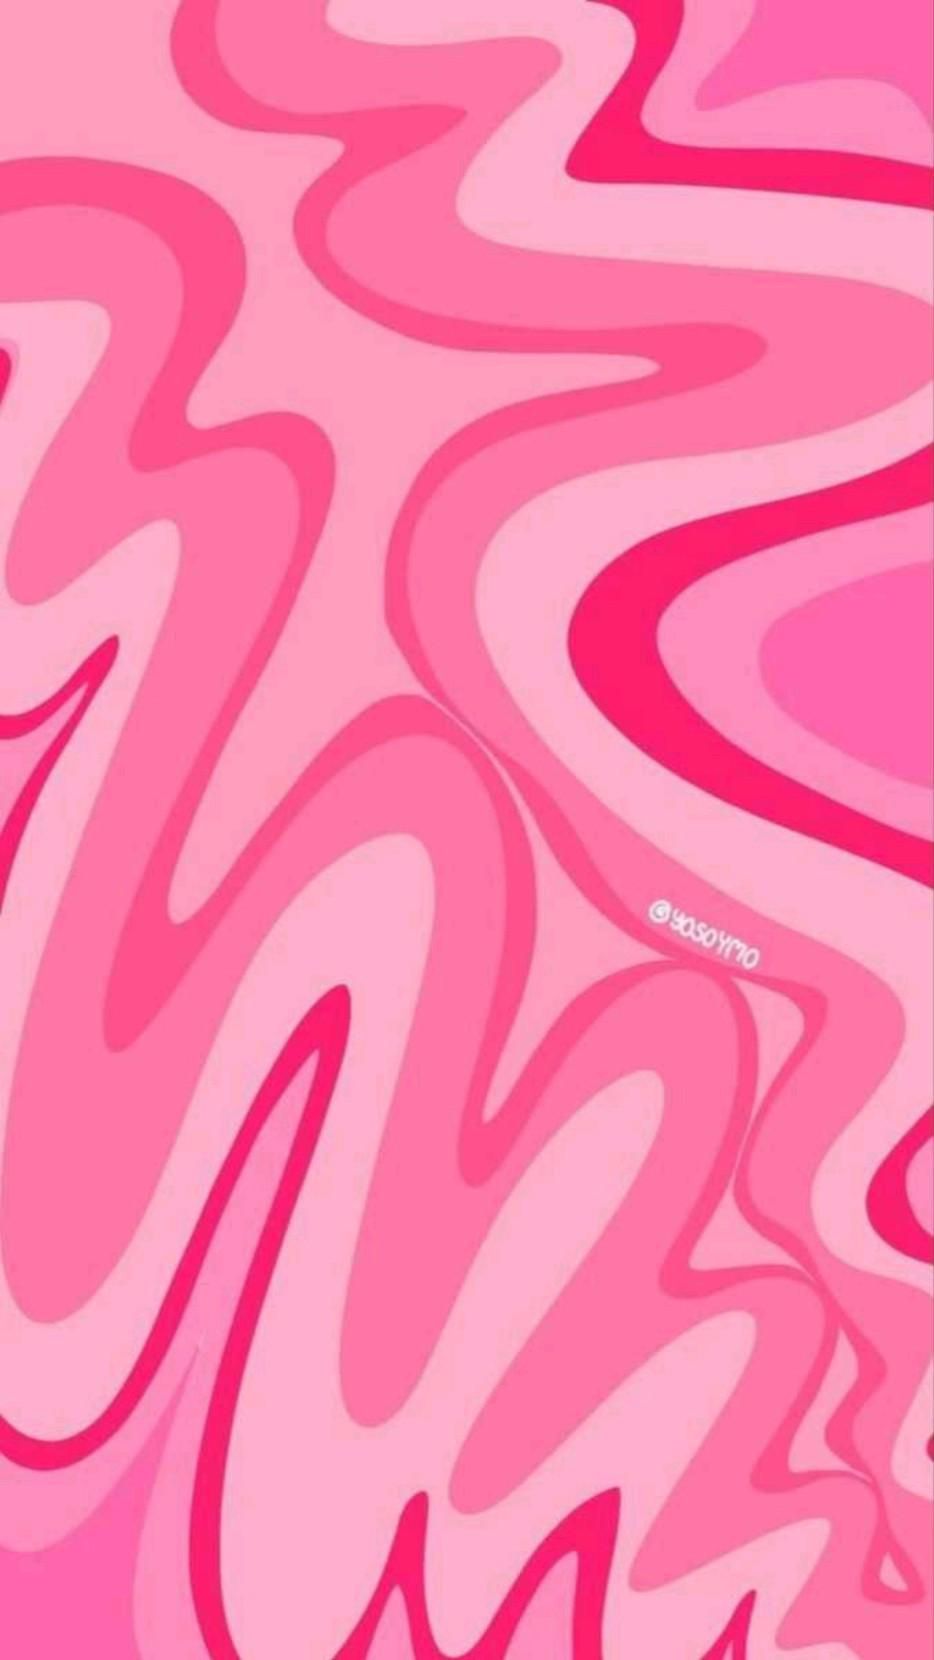 Pink aesthetic background wallpaper phone background aesthetic - Preppy